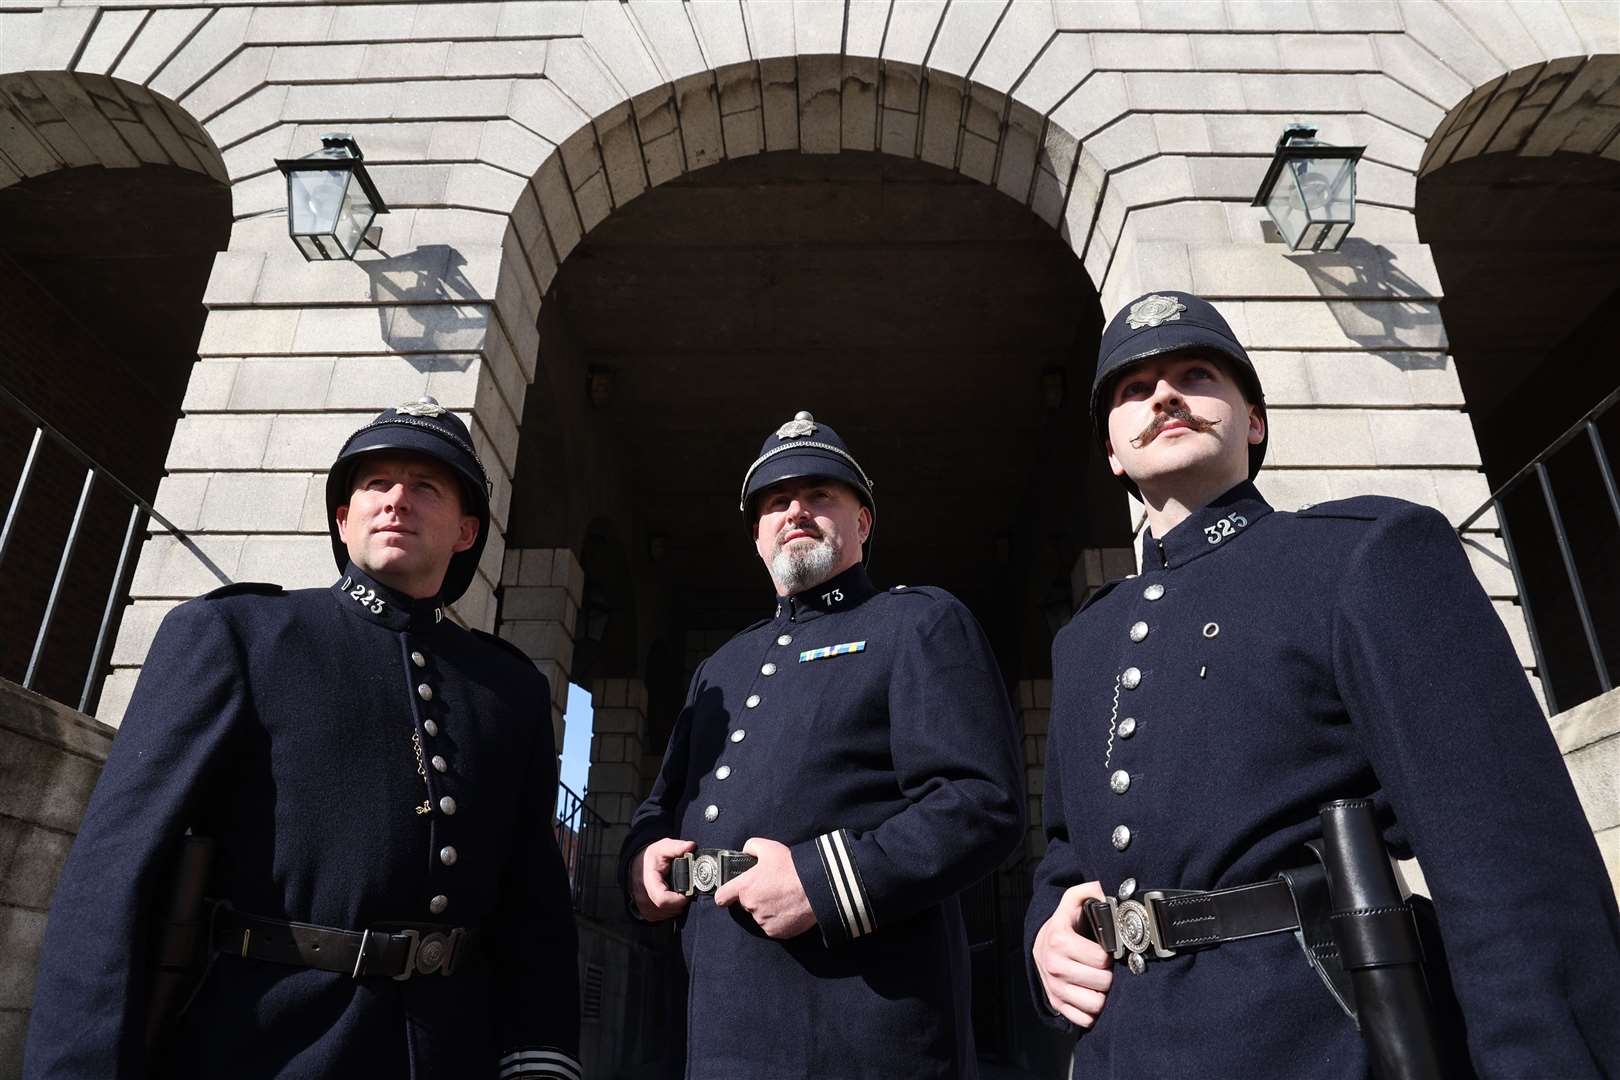 Matthew Gargan, left to right, Tom Daly and Emmet Harte in original Garda uniform during a parade in Dublin to mark the anniversary of the transfer of policing duties from British rule 100 years ago (Nick Bradshaw/PA)